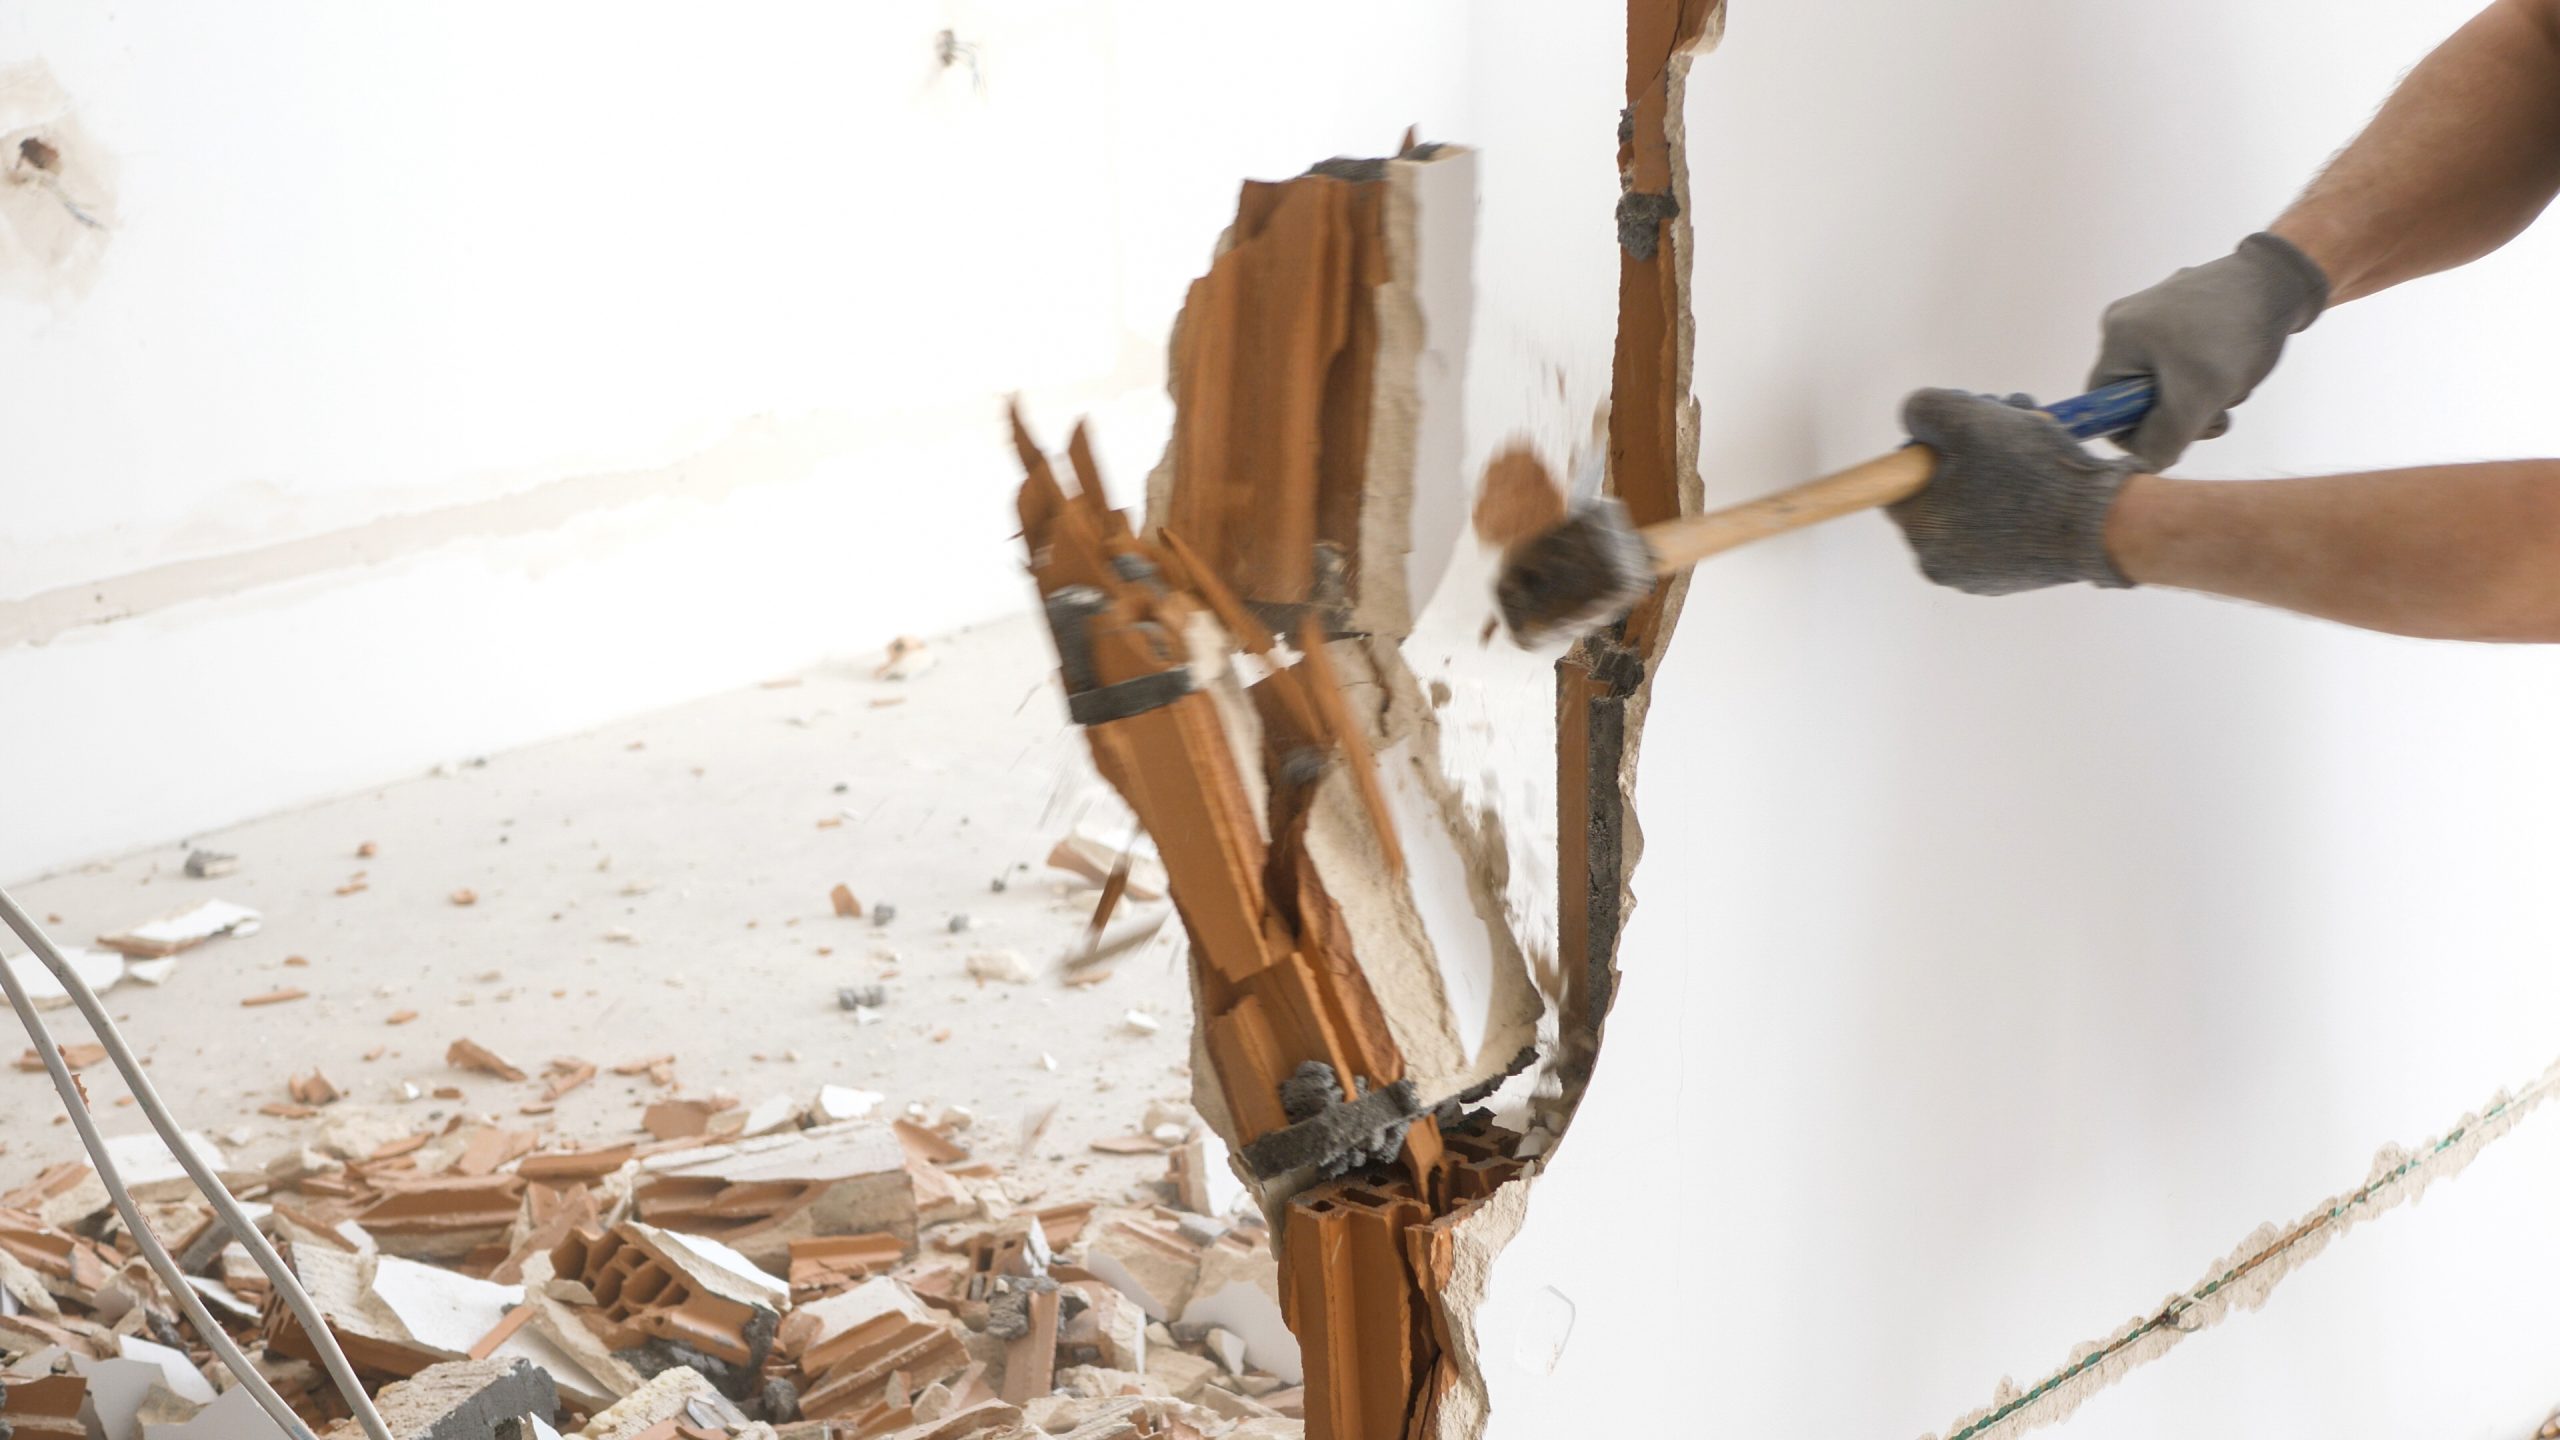 Can concrete demolition be done without damaging the surrounding area? faq - The Junk Guys